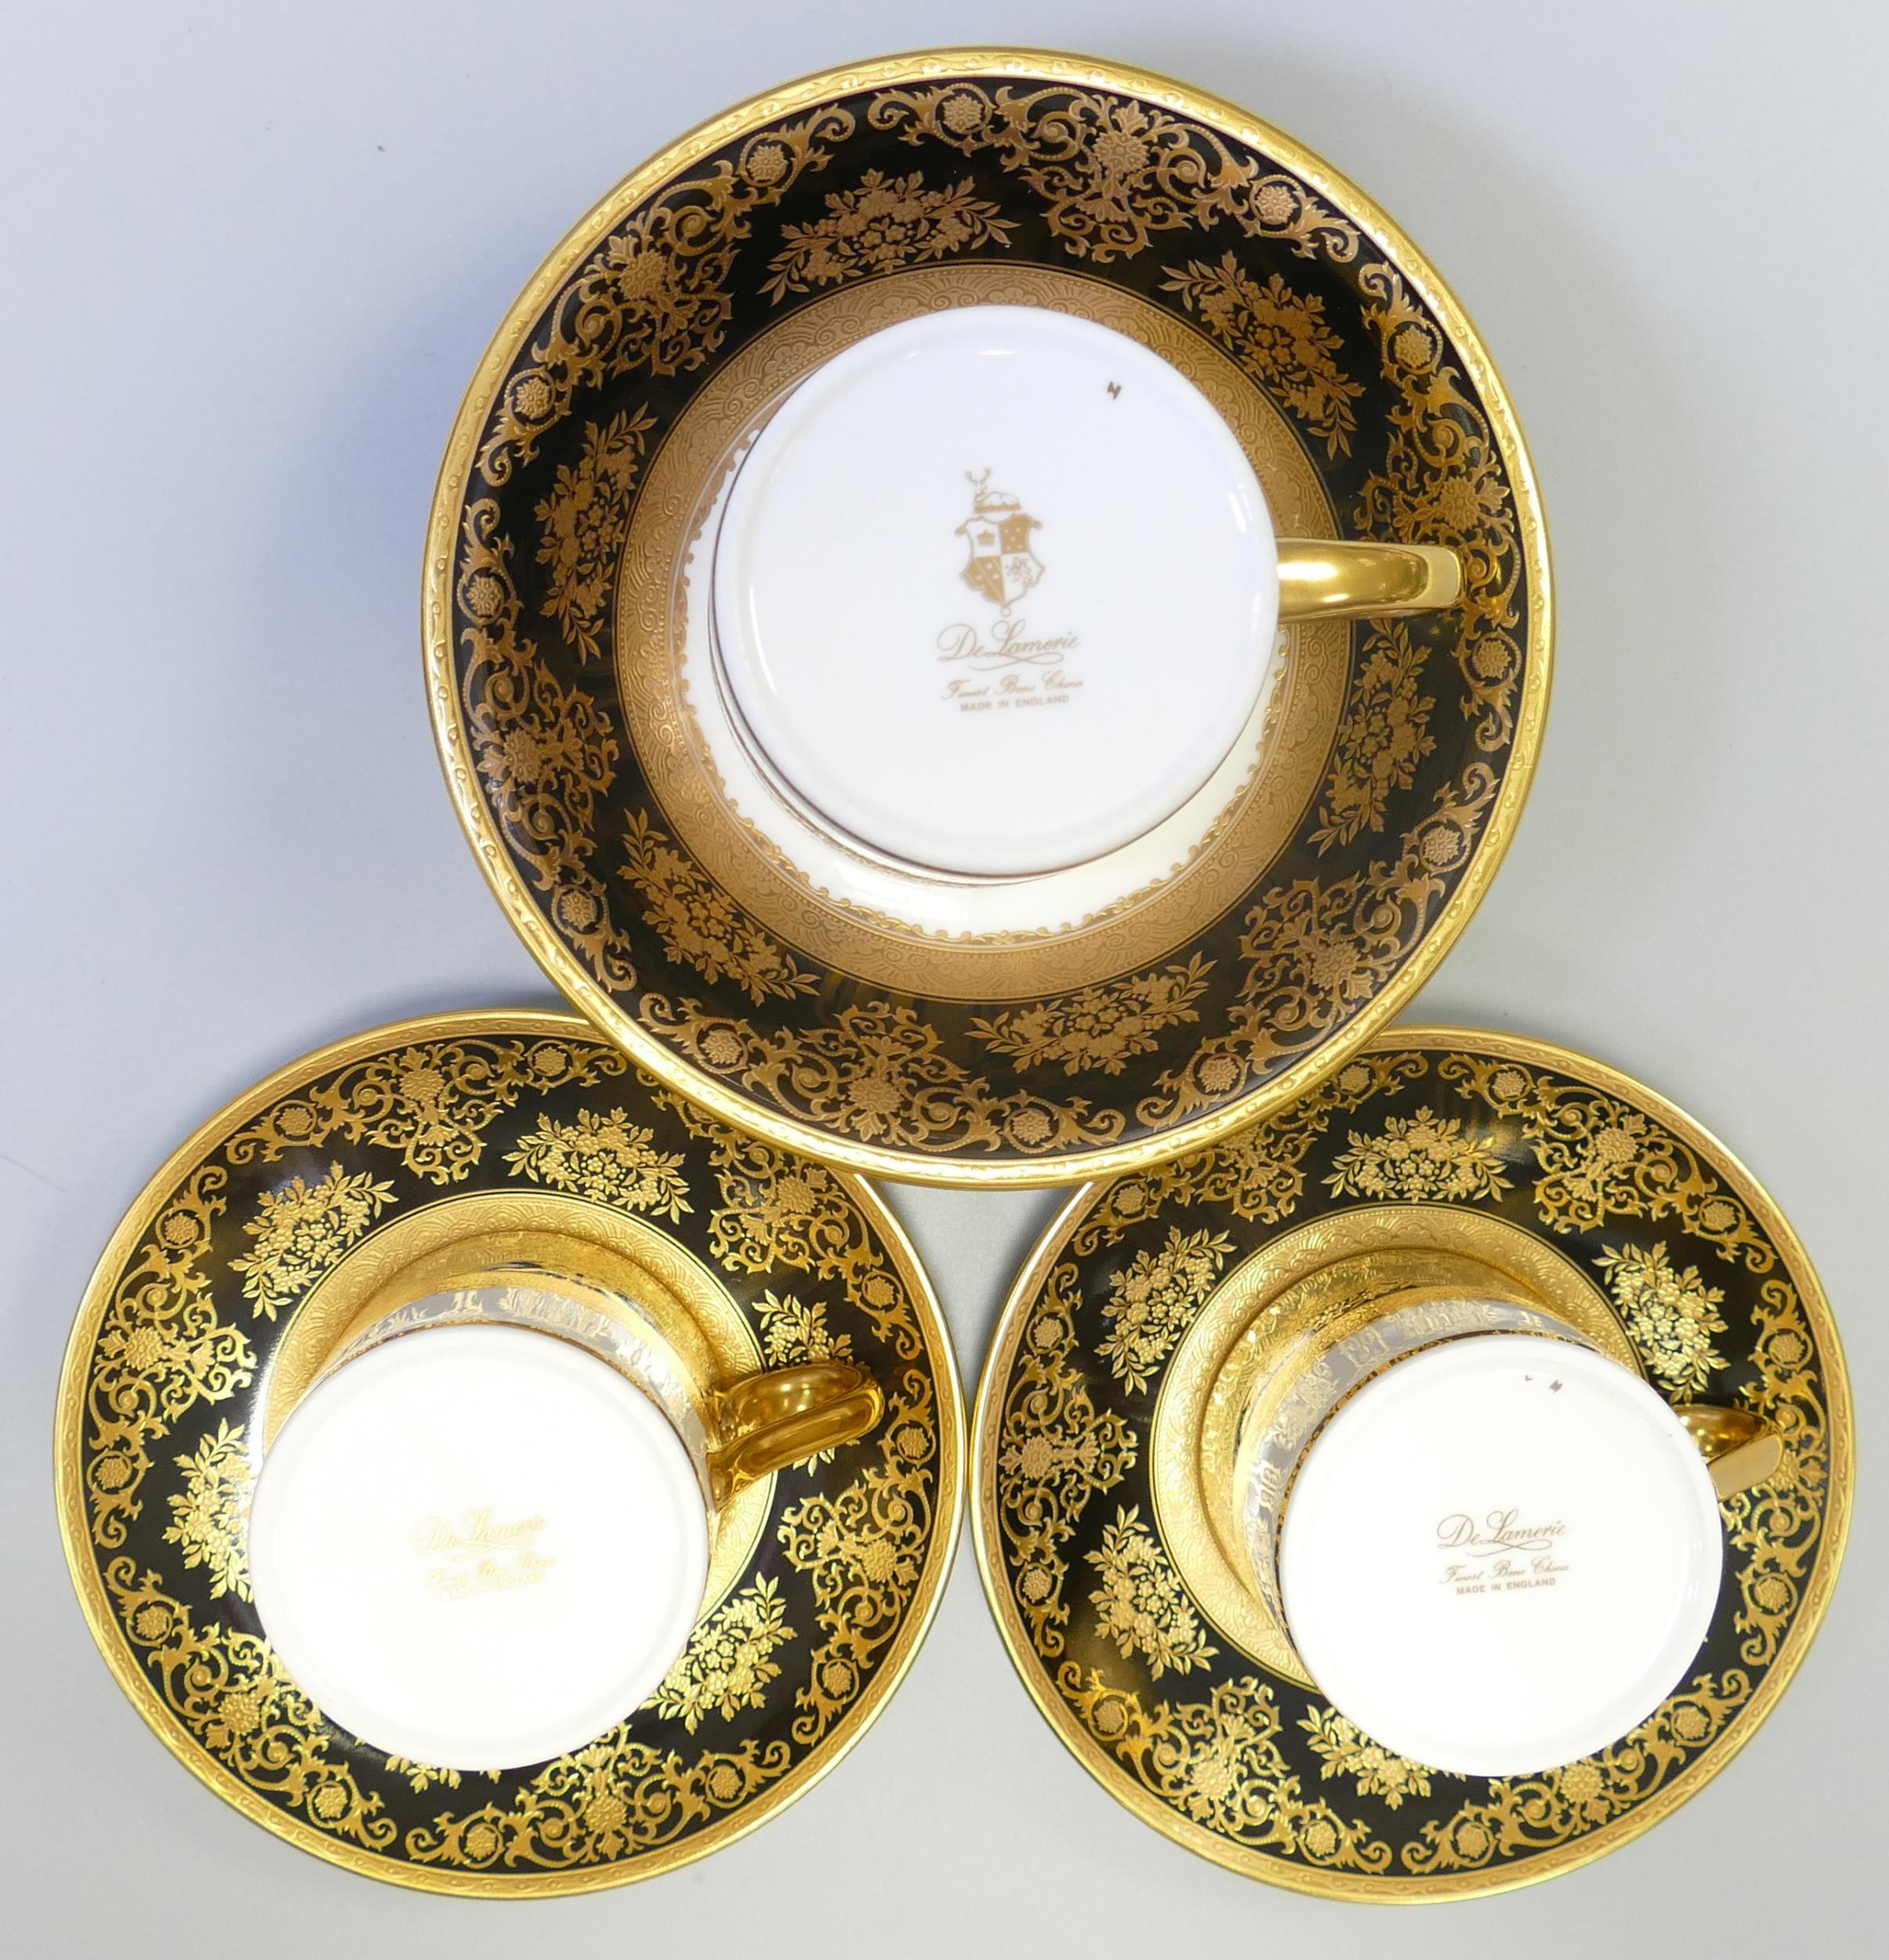 De Lamerie Fine Bone China heavily gilded Black Exotic Garden patterned cup & saucer sets & small - Image 2 of 2